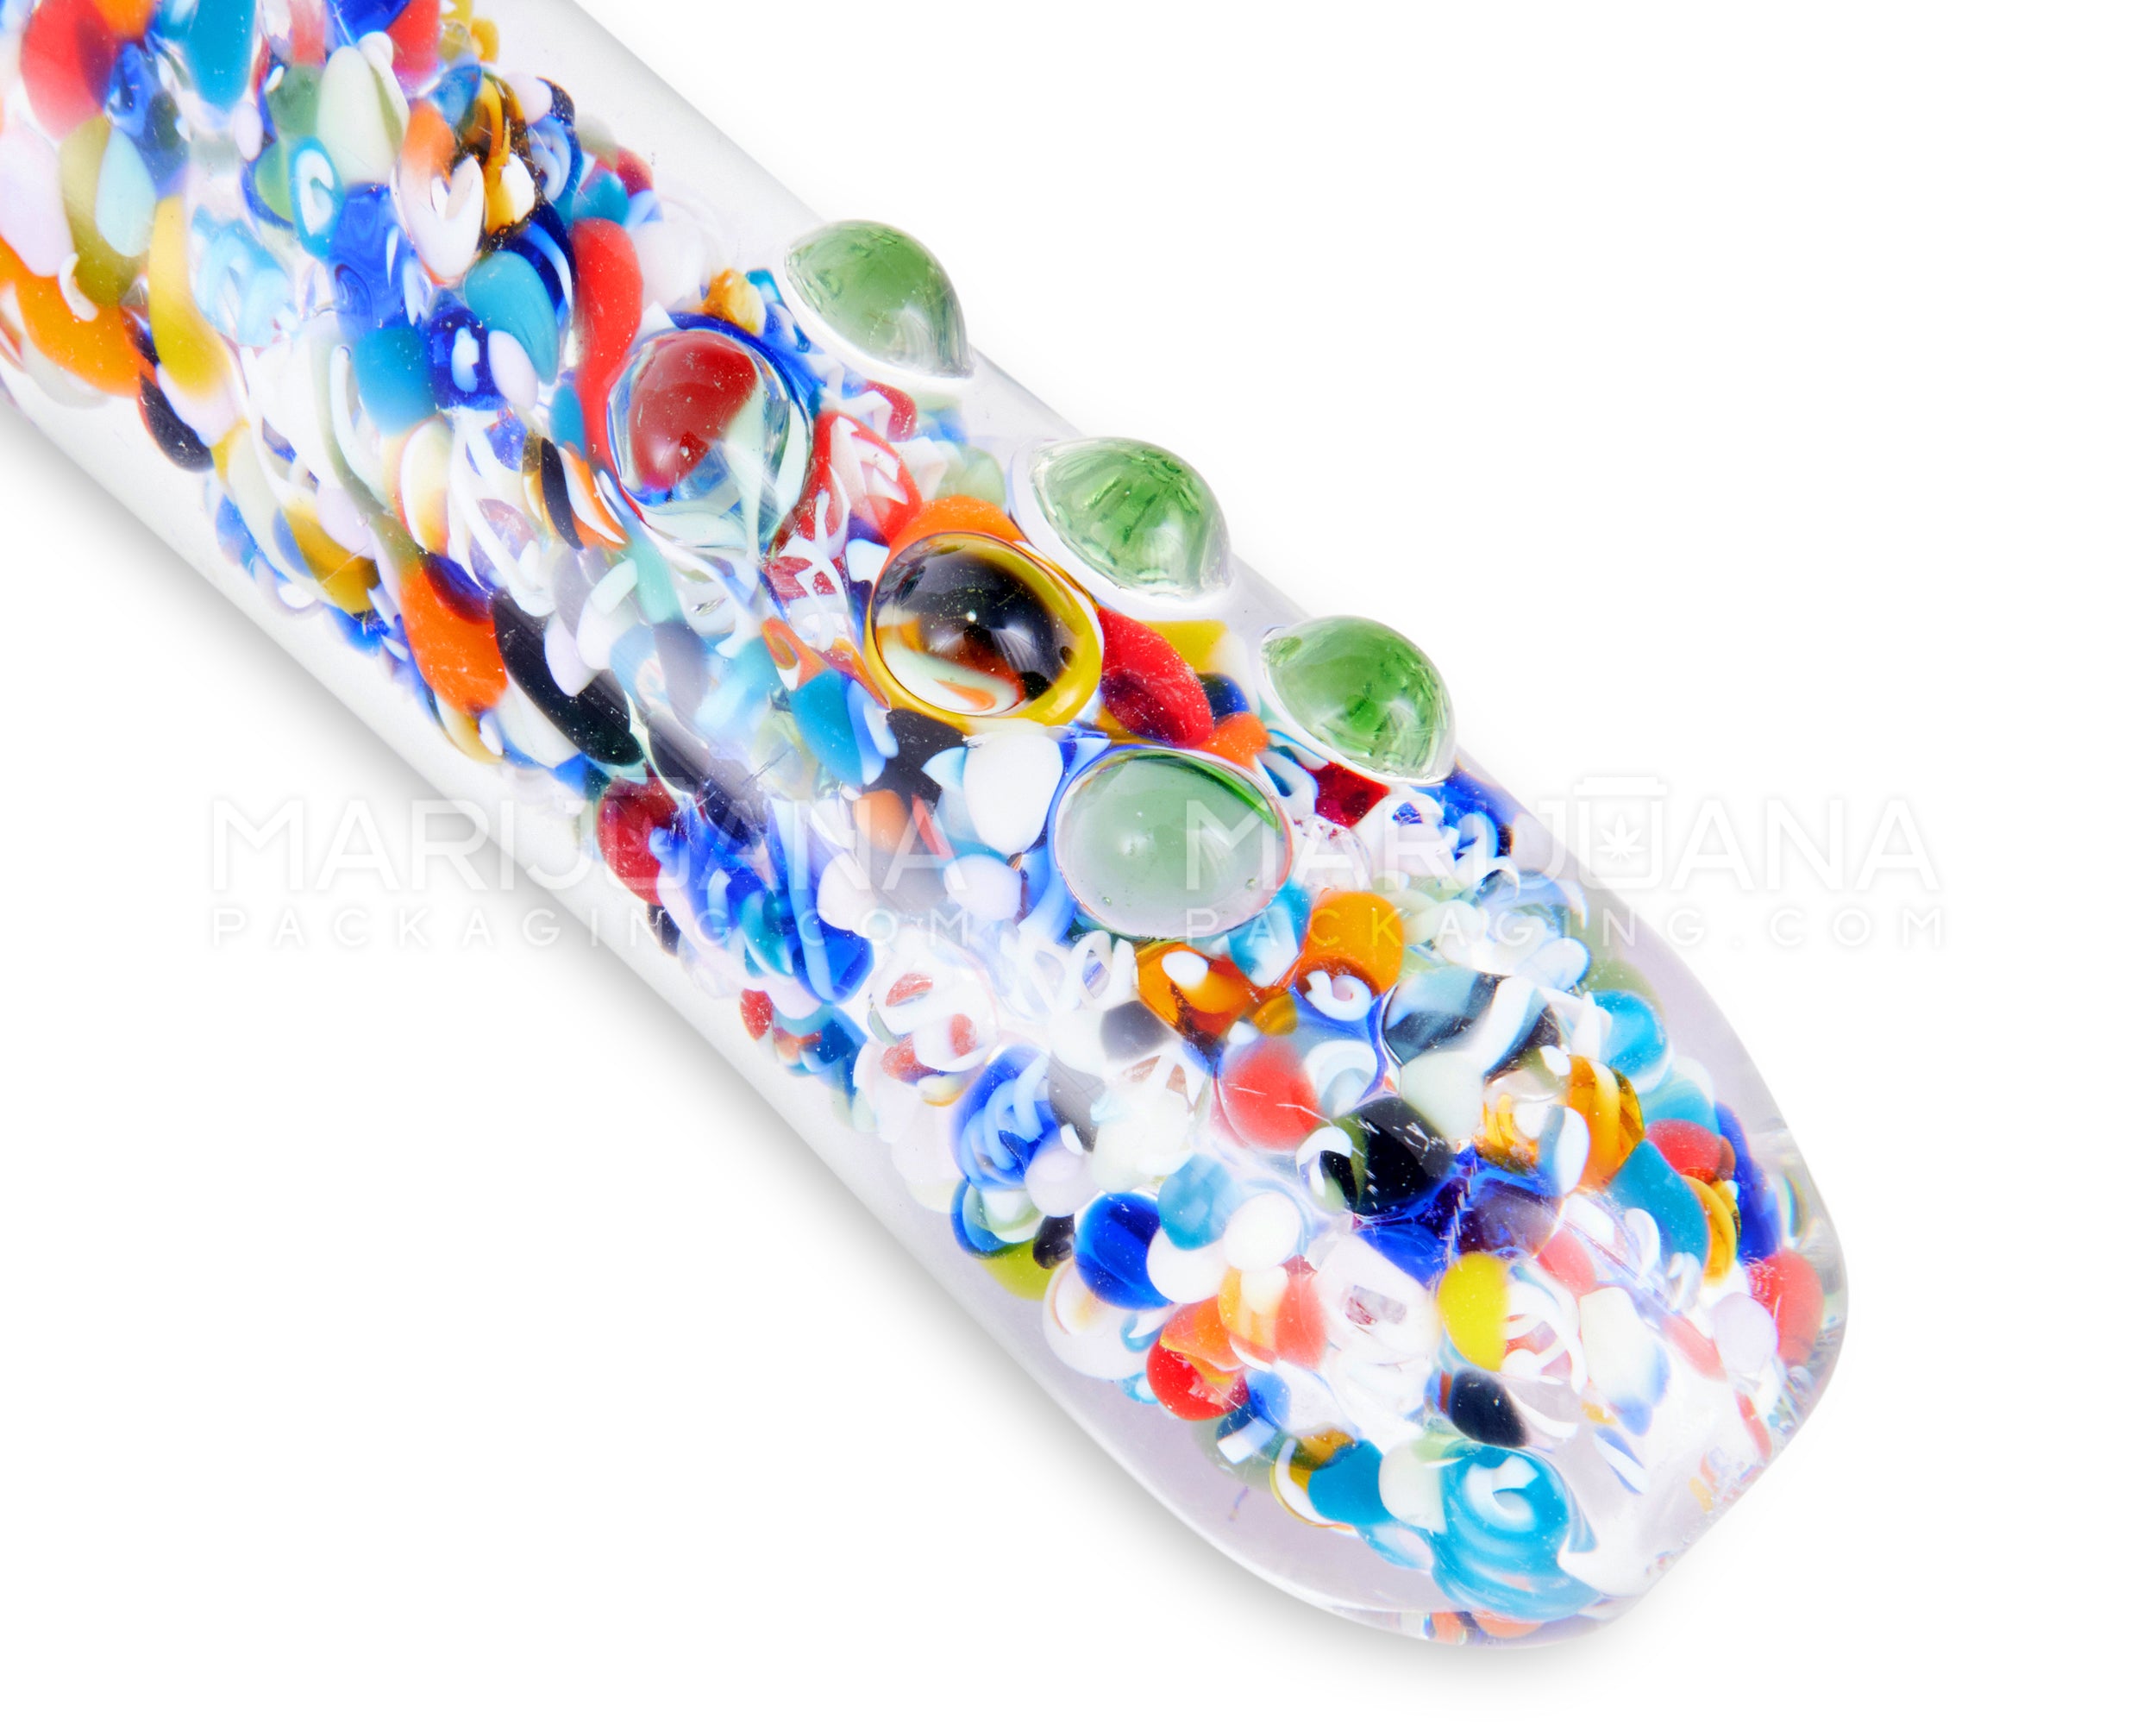 Frit & Dichro Spoon Hand Pipe w/ Multi Knockers | 4.5in Long - Glass - Assorted - 3